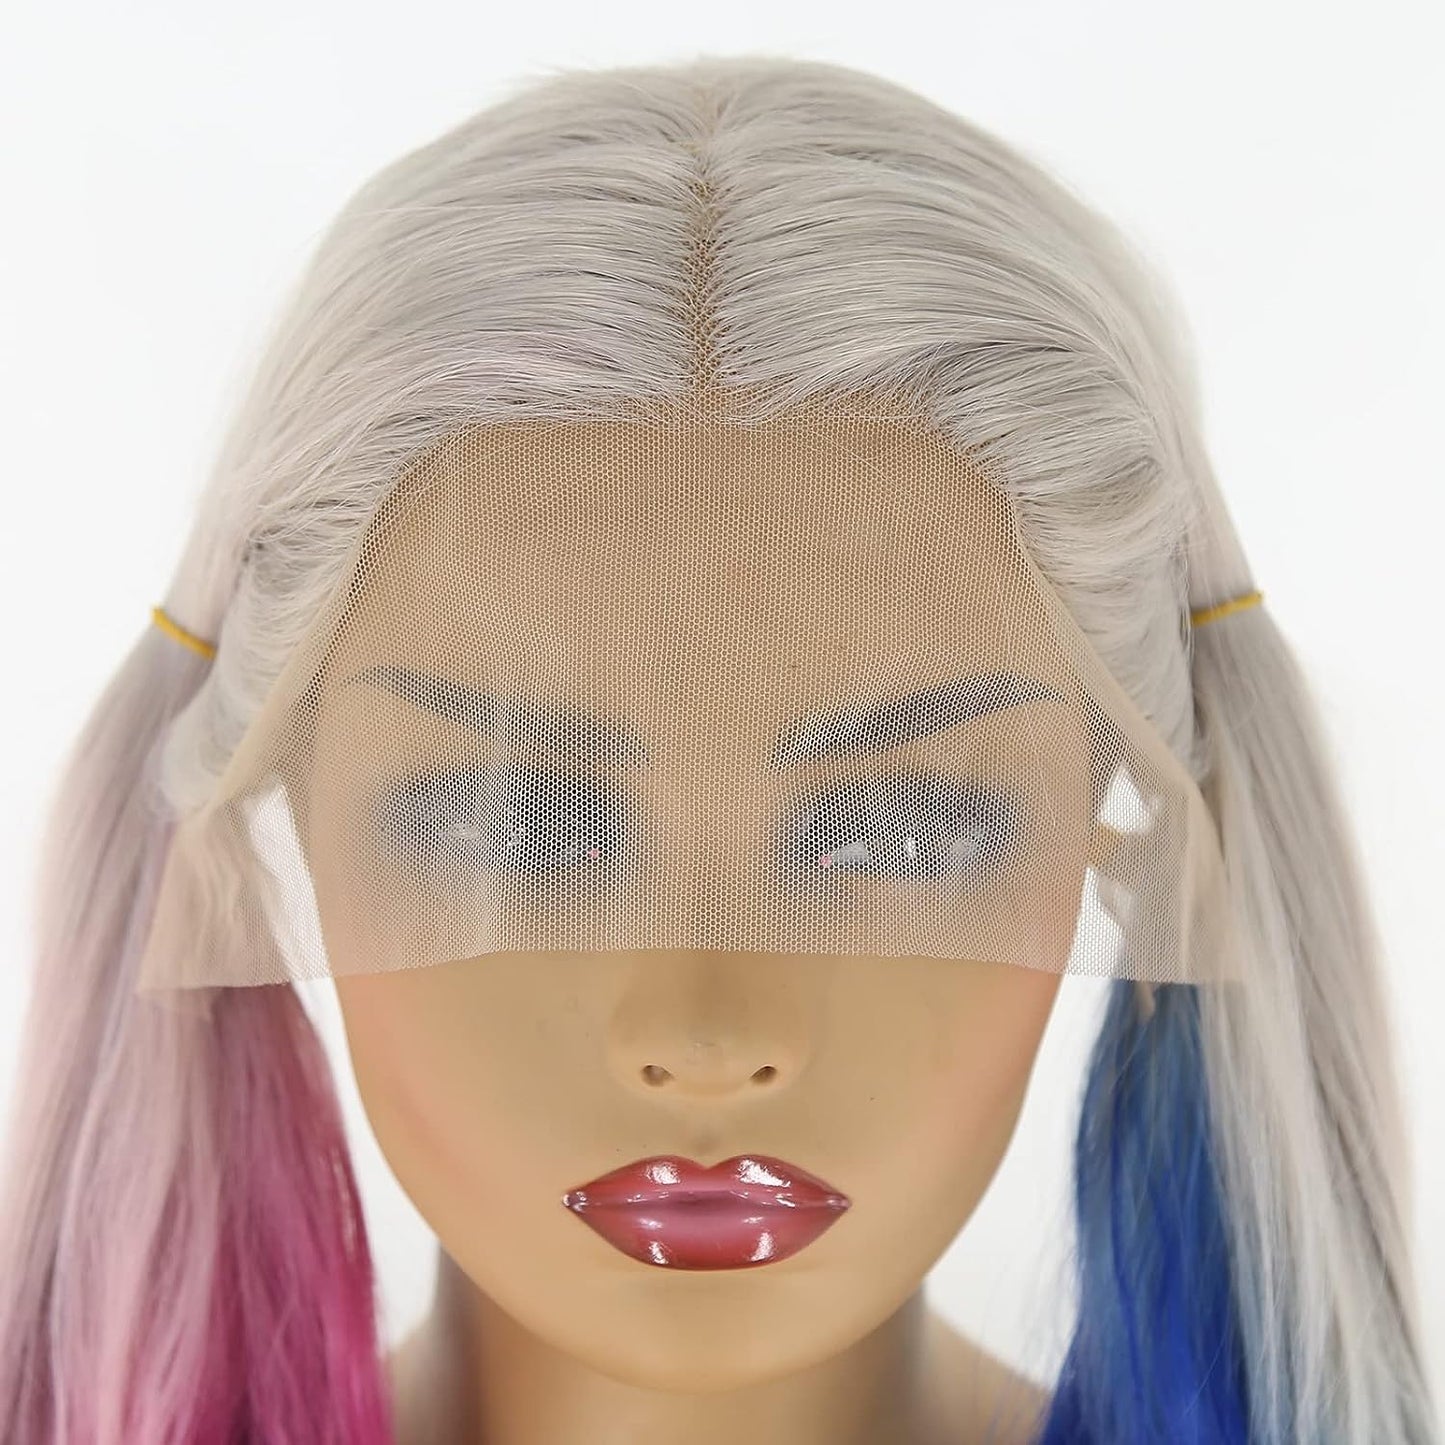 Get Playfully Chaotic with our Harley Quinn Lace Front Wig - Perfect for Cosplay and Fun!